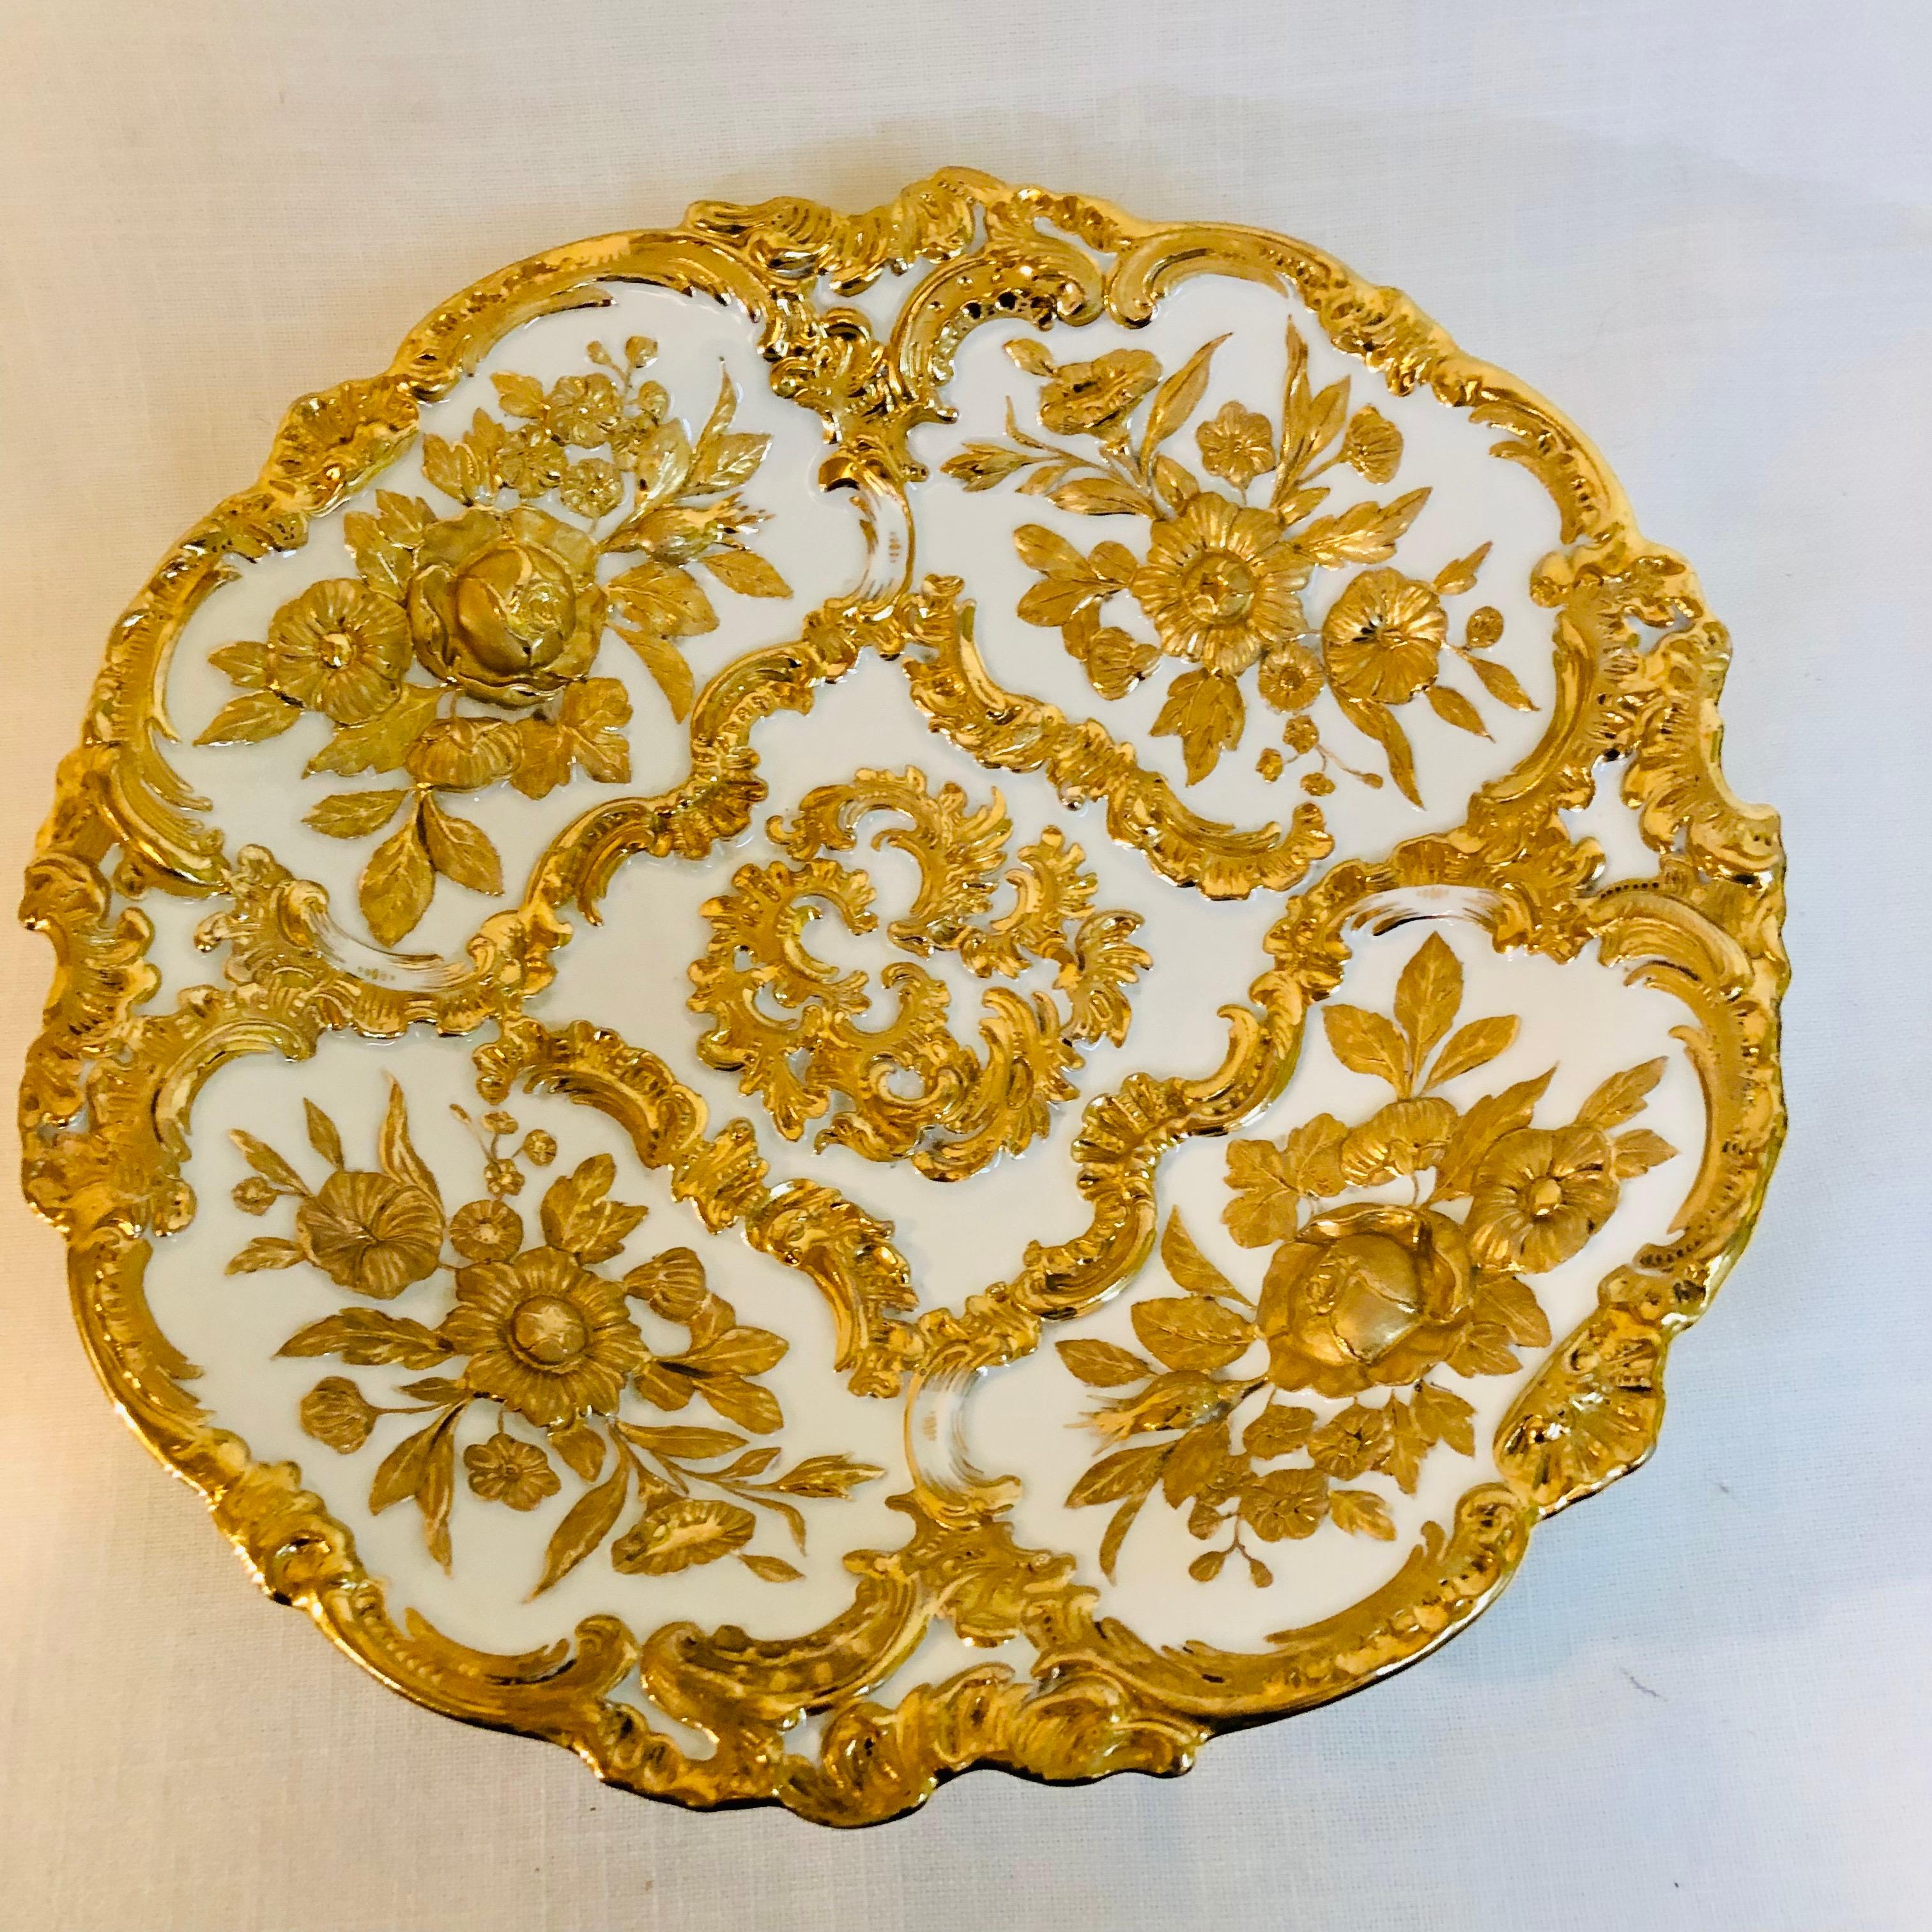 This is an absolutely gorgeous Meissen gold and white charger or round platter. It has a beautiful raised gold decoration of flowers and leaves with other elaborate gilded accents. If you look at the attached photographs, you can see the profuse